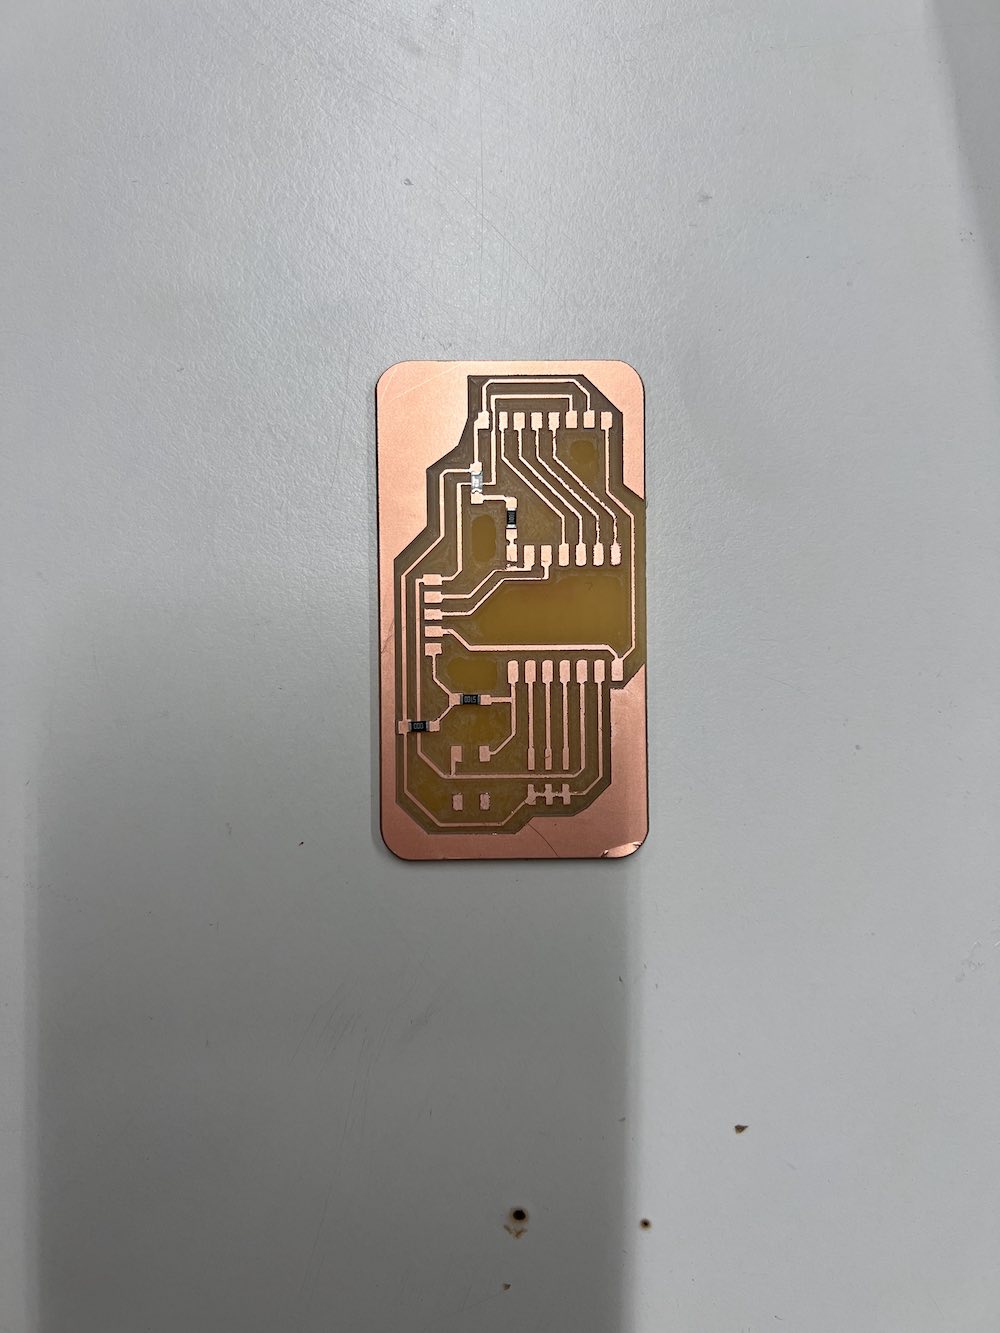 Aligning components on milled board